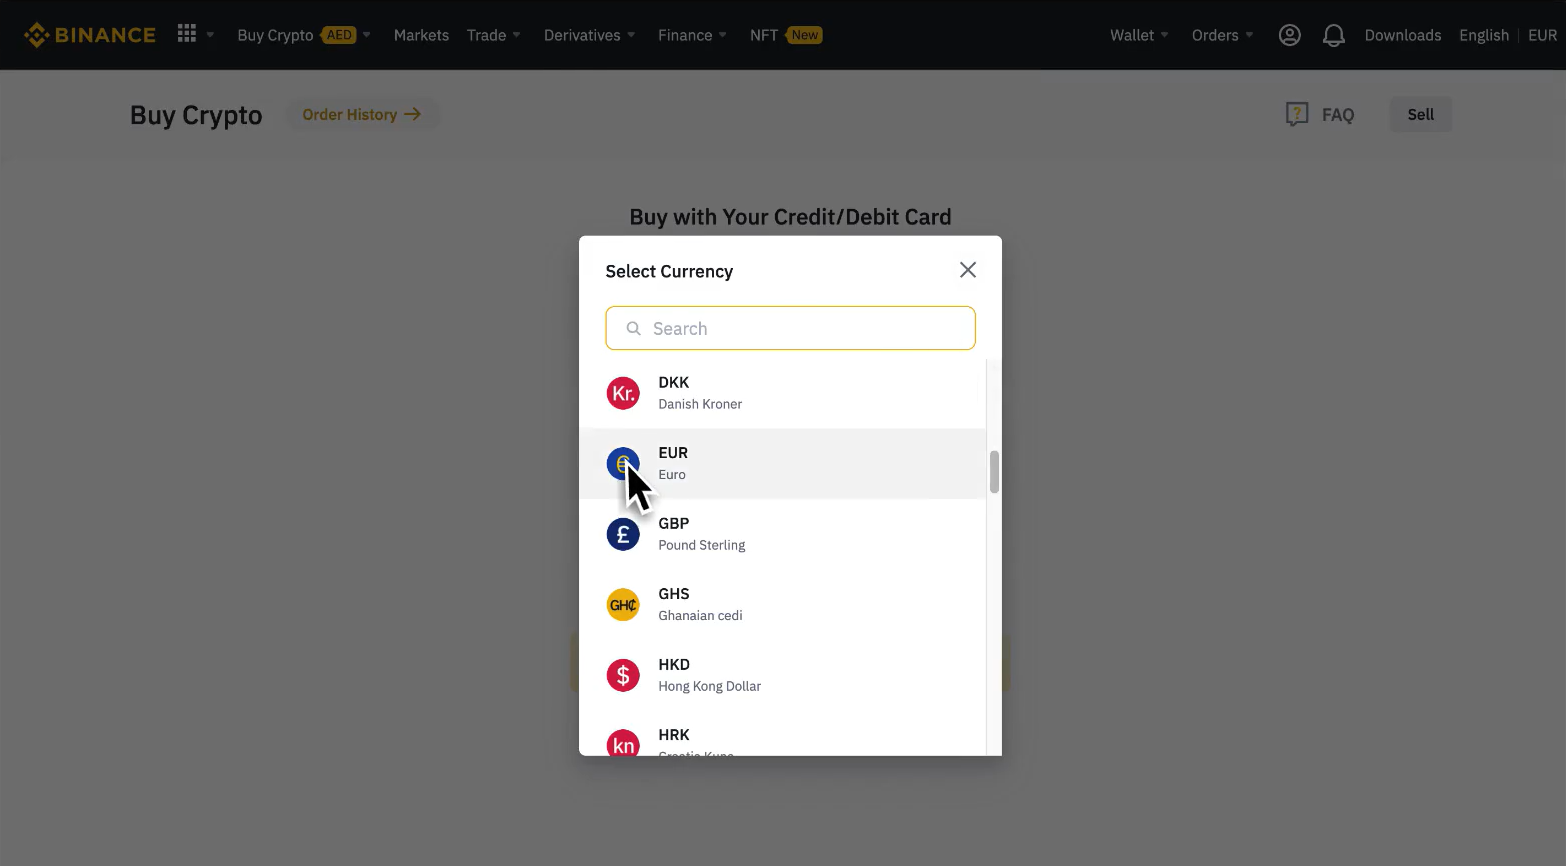 Binance web interface: the second step to buy BNB with a Credit or Debit card.